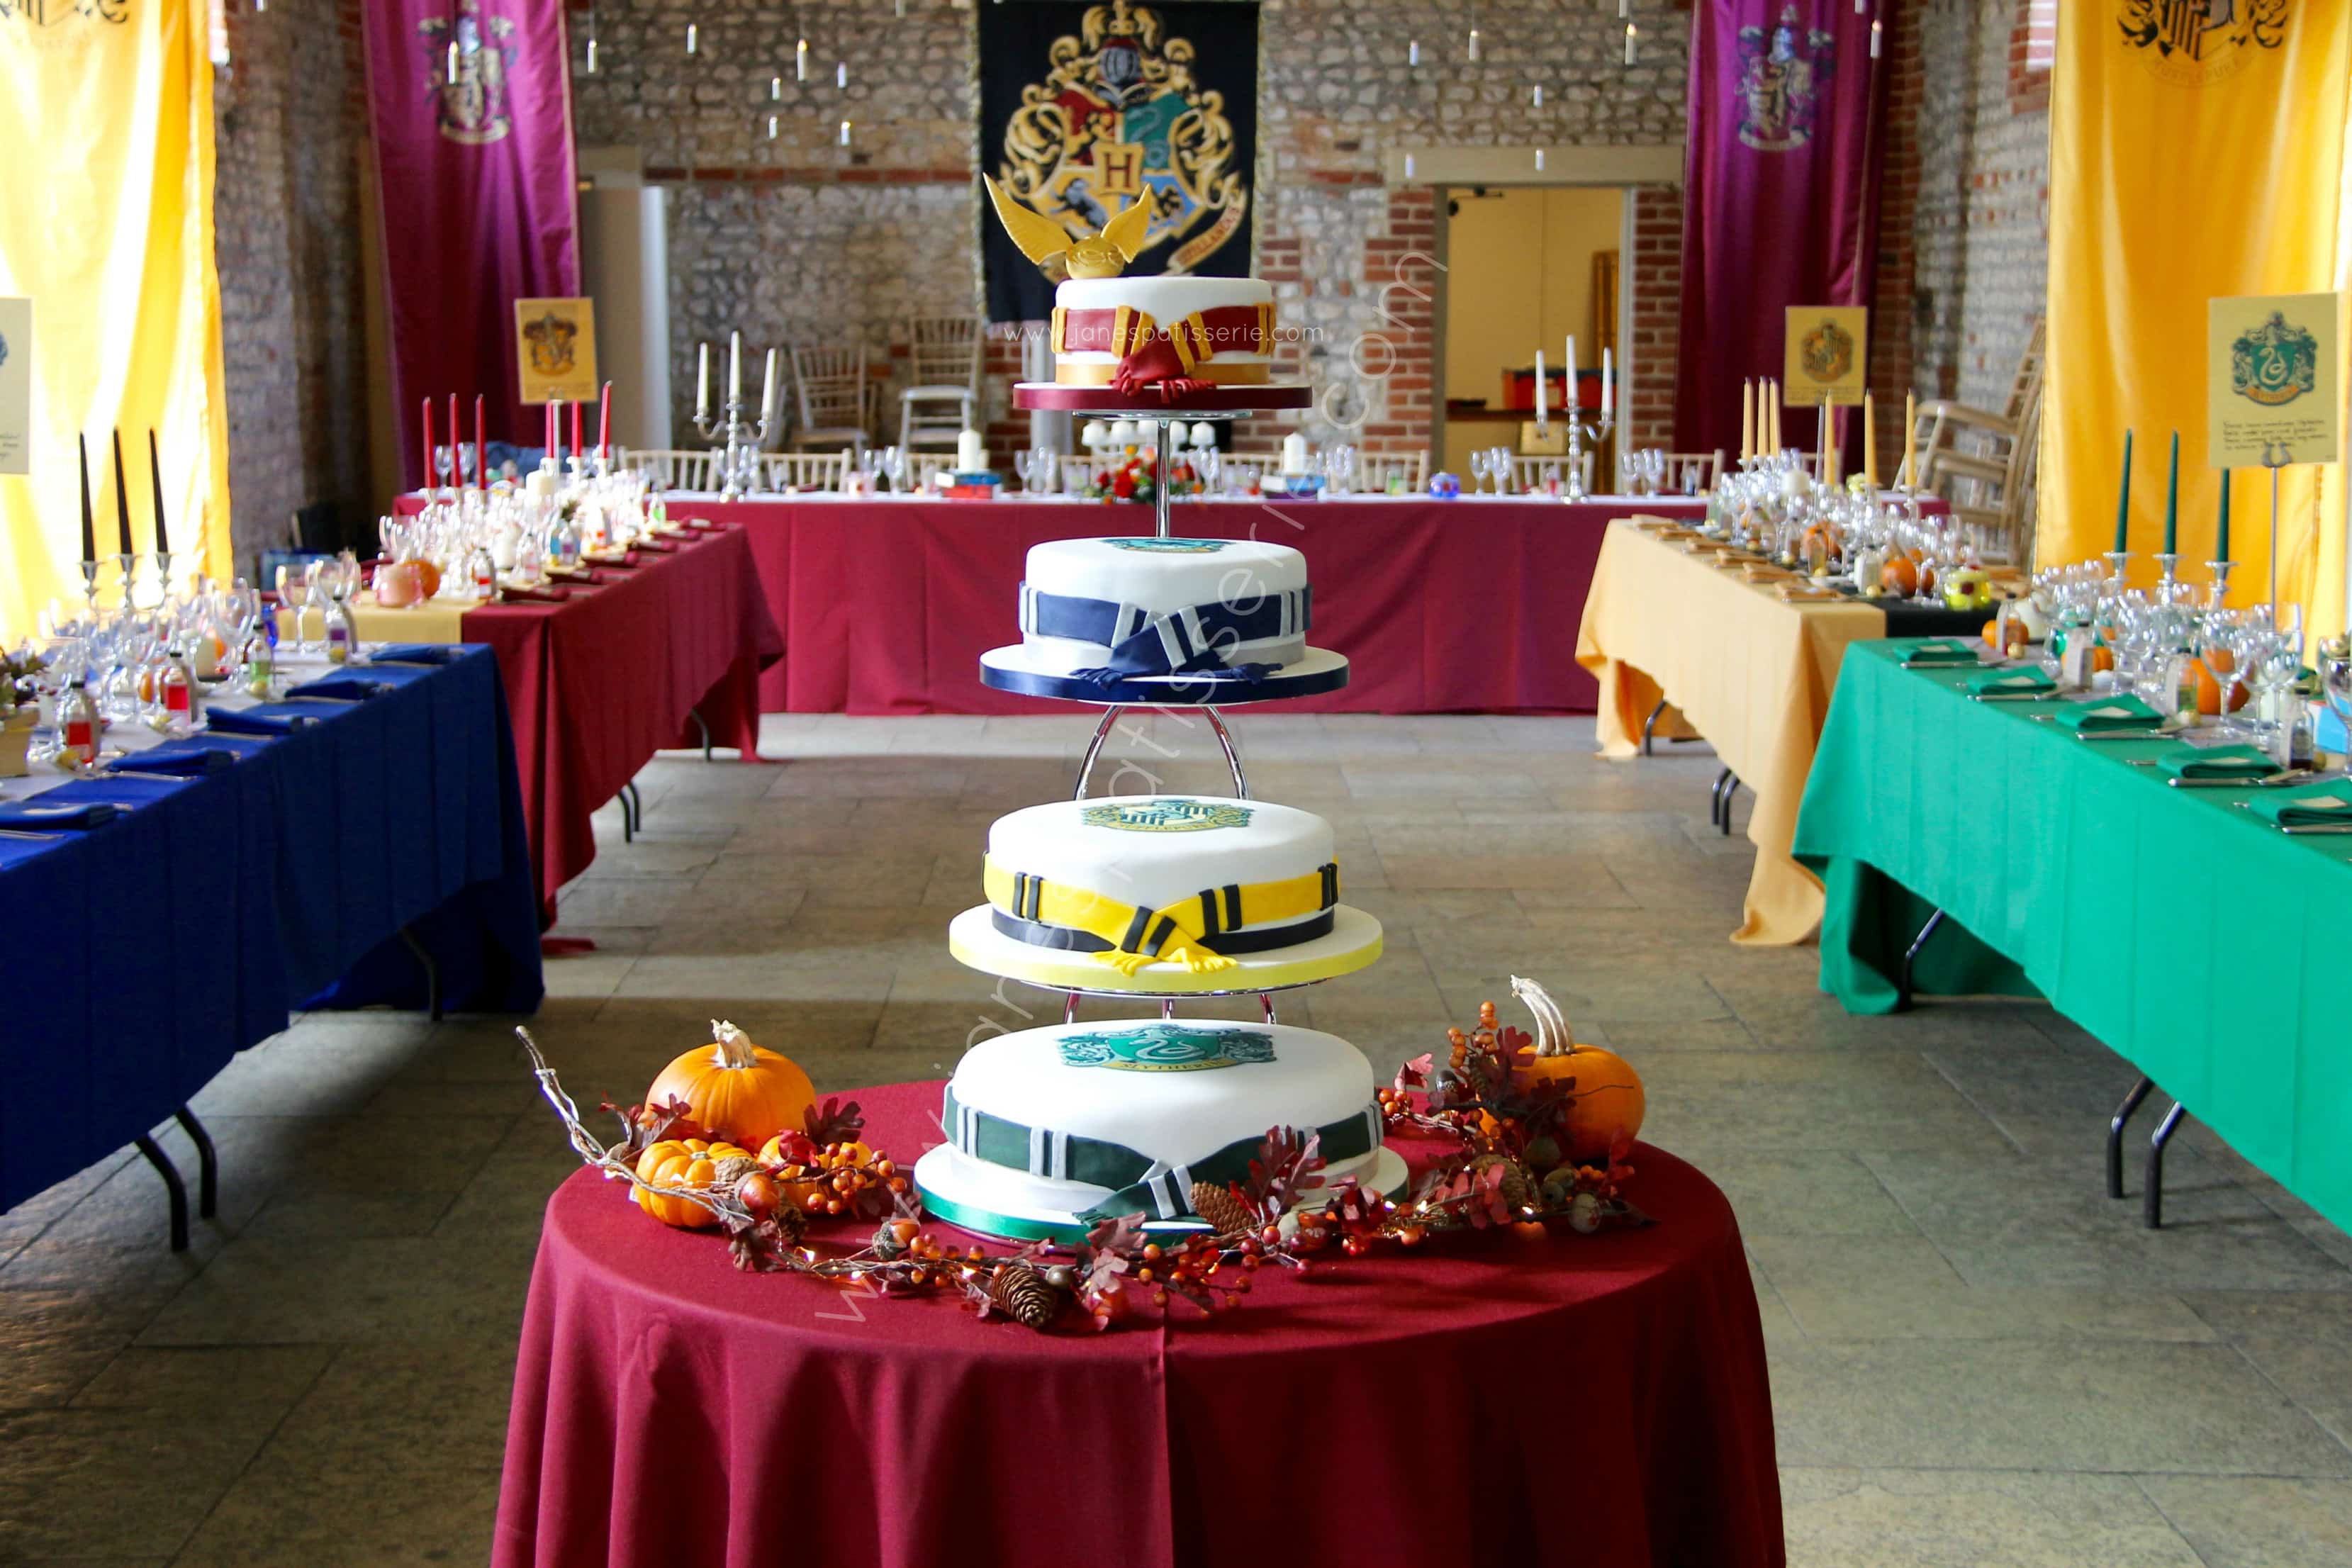 25 Completely Magical Harry Potter Wedding Ideas  Harry potter wedding, Harry  potter wedding theme, Harry potter